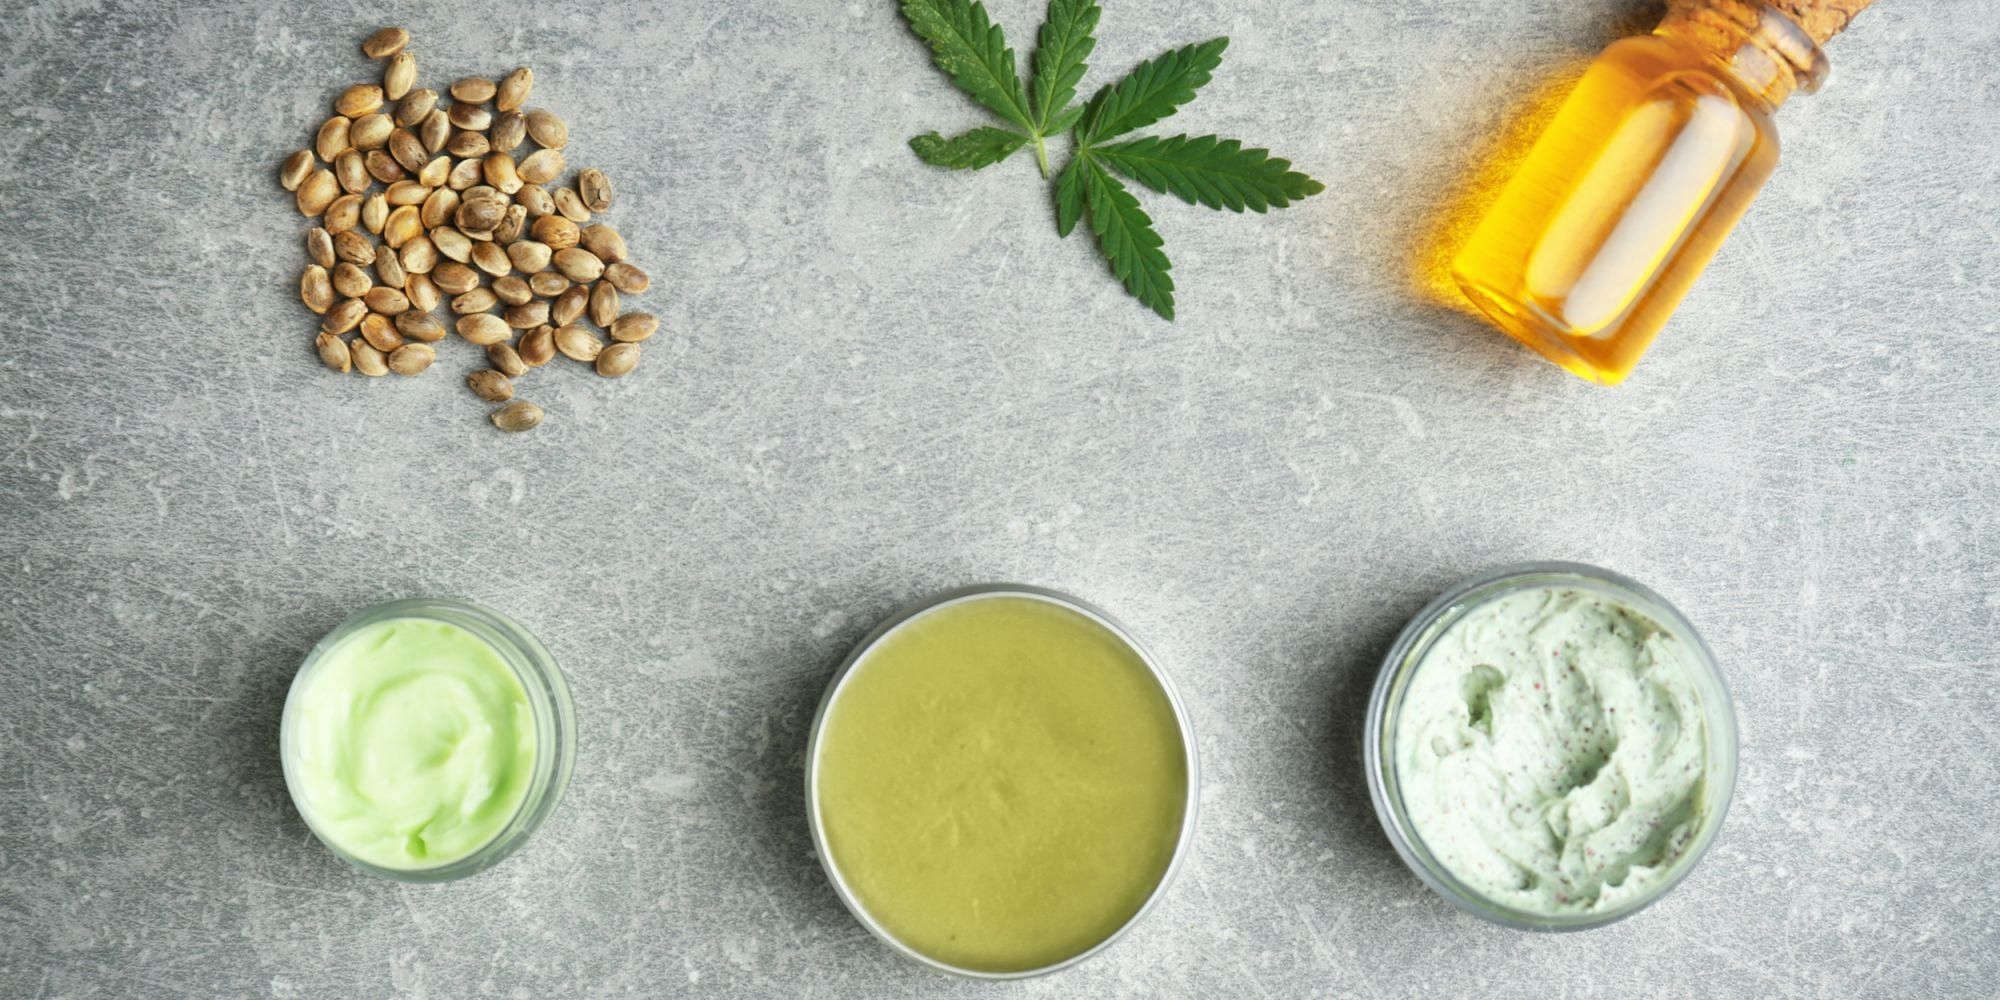 8 COMMON TYPES OF CBD PRODUCTS & HOW TO USE THEM